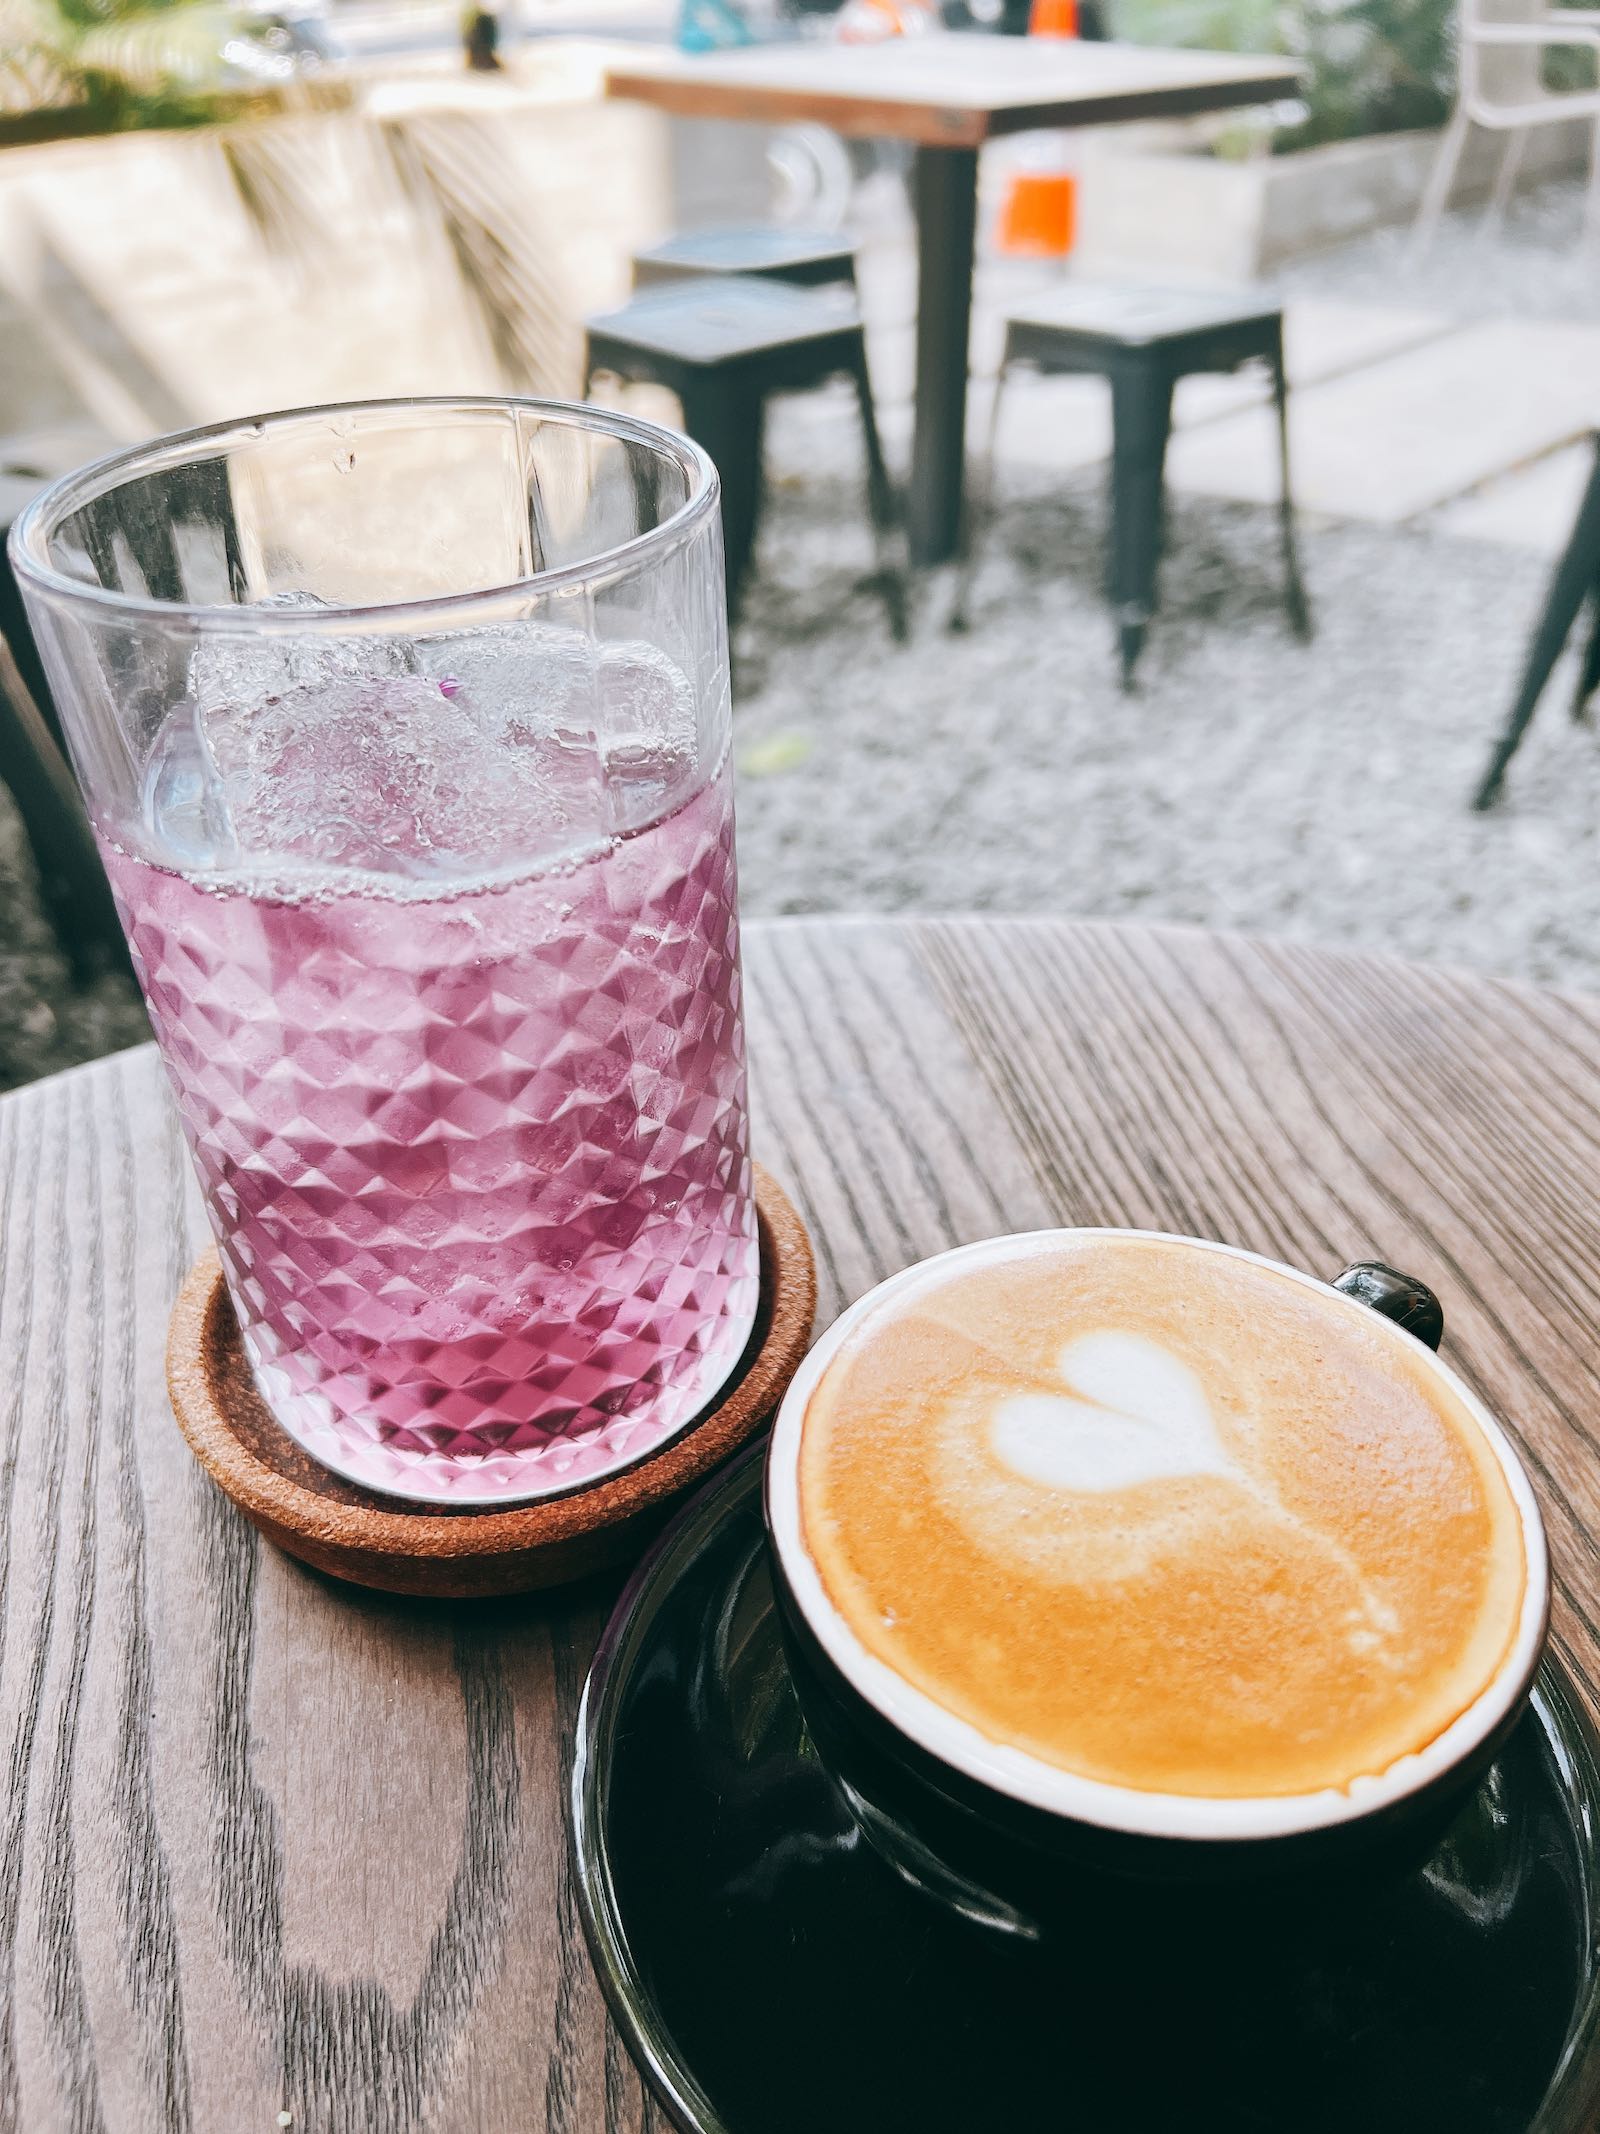 Bandung Cafes By Taboo Drinks